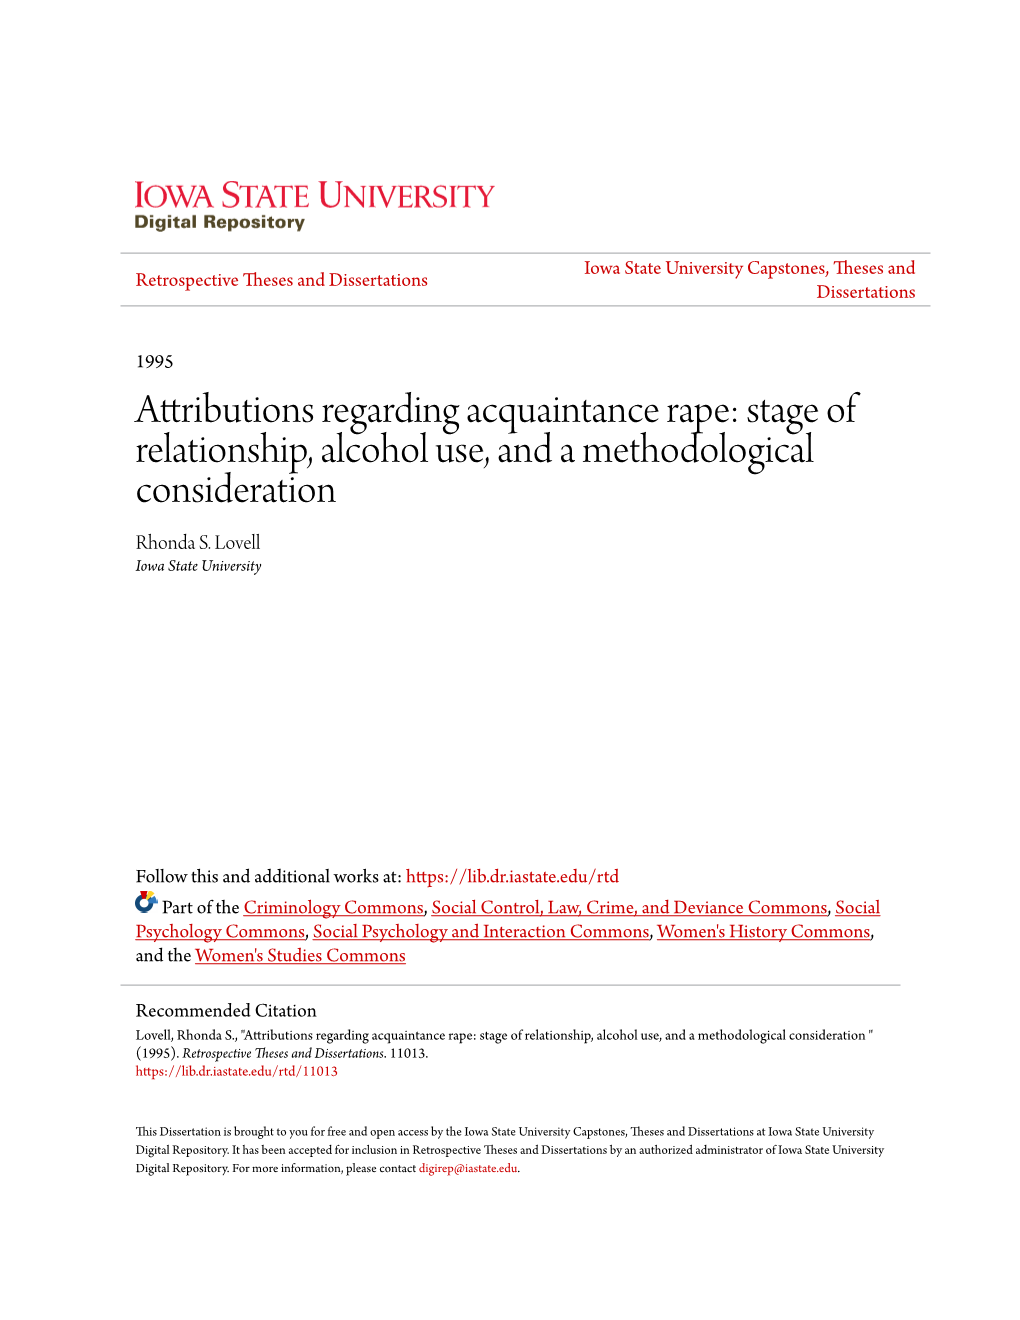 Attributions Regarding Acquaintance Rape: Stage of Relationship, Alcohol Use, and a Methodological Consideration Rhonda S